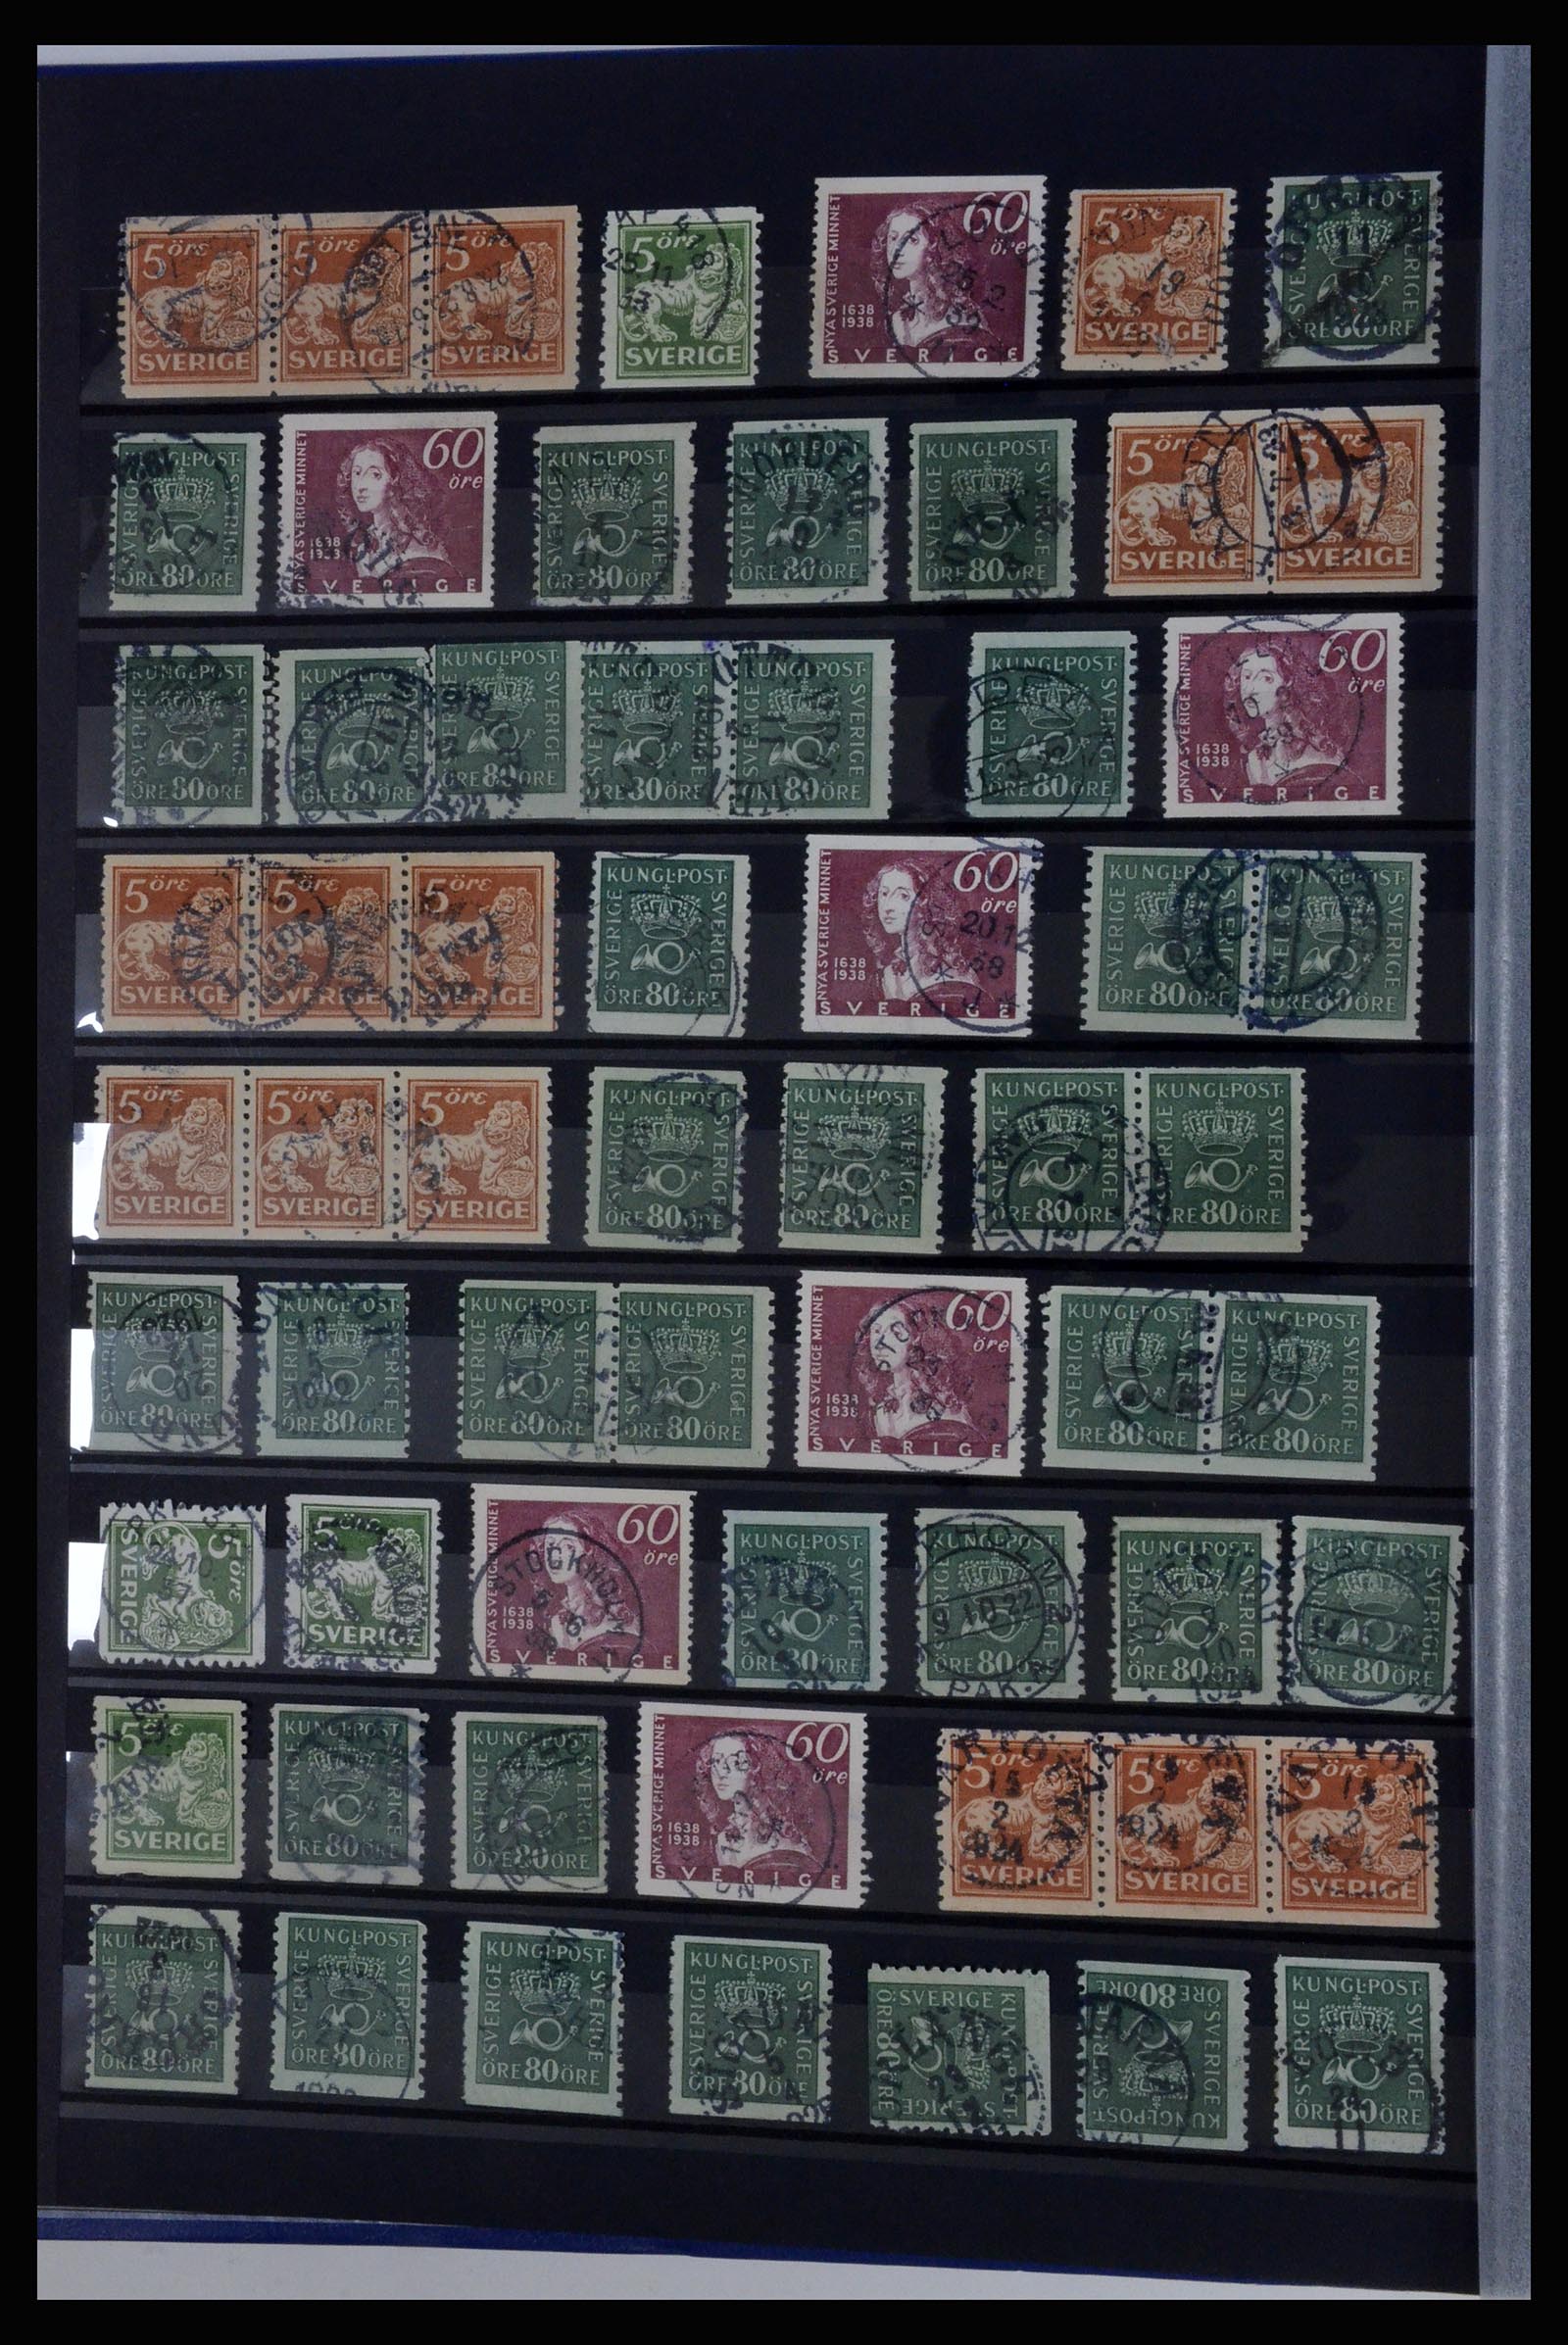 36316 008 - Stamp collection 36316 Sweden cancellations 1920-1938.